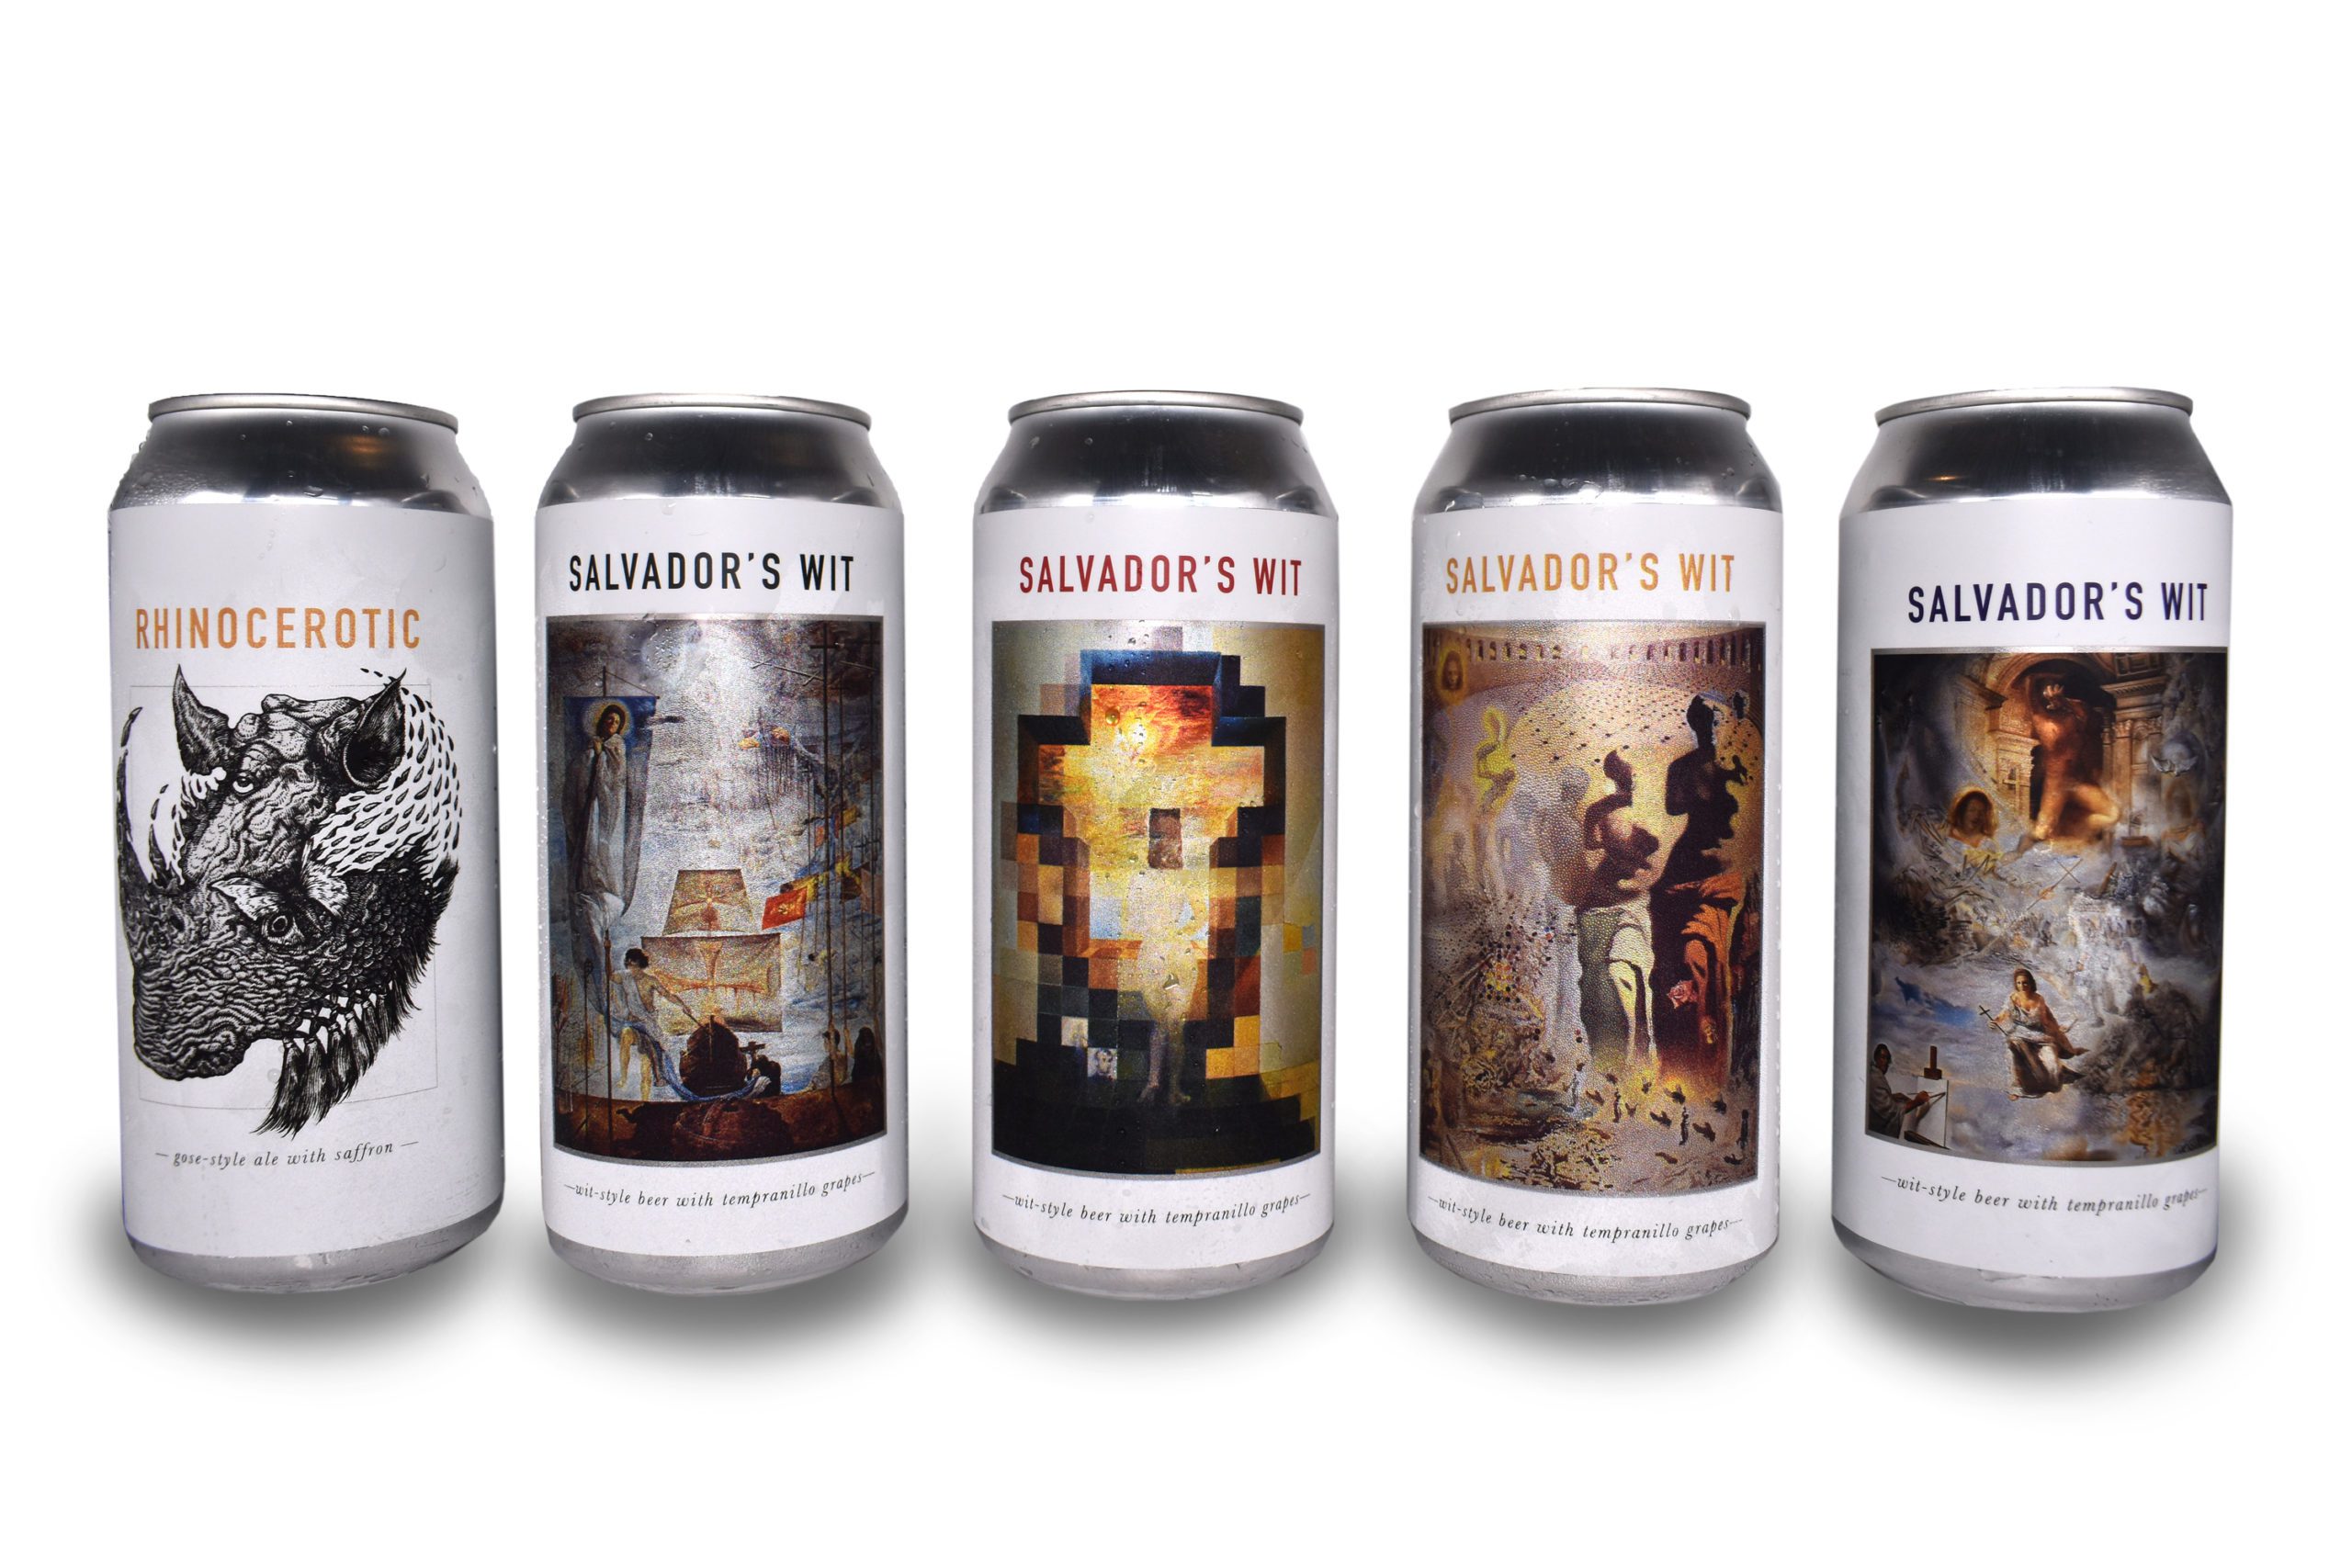 Dali Museum Motorworks Brewing Collab Set of 5 with 4 Dali Masterworks and 1 original Motorworks Rhino artwork on all 5 cans